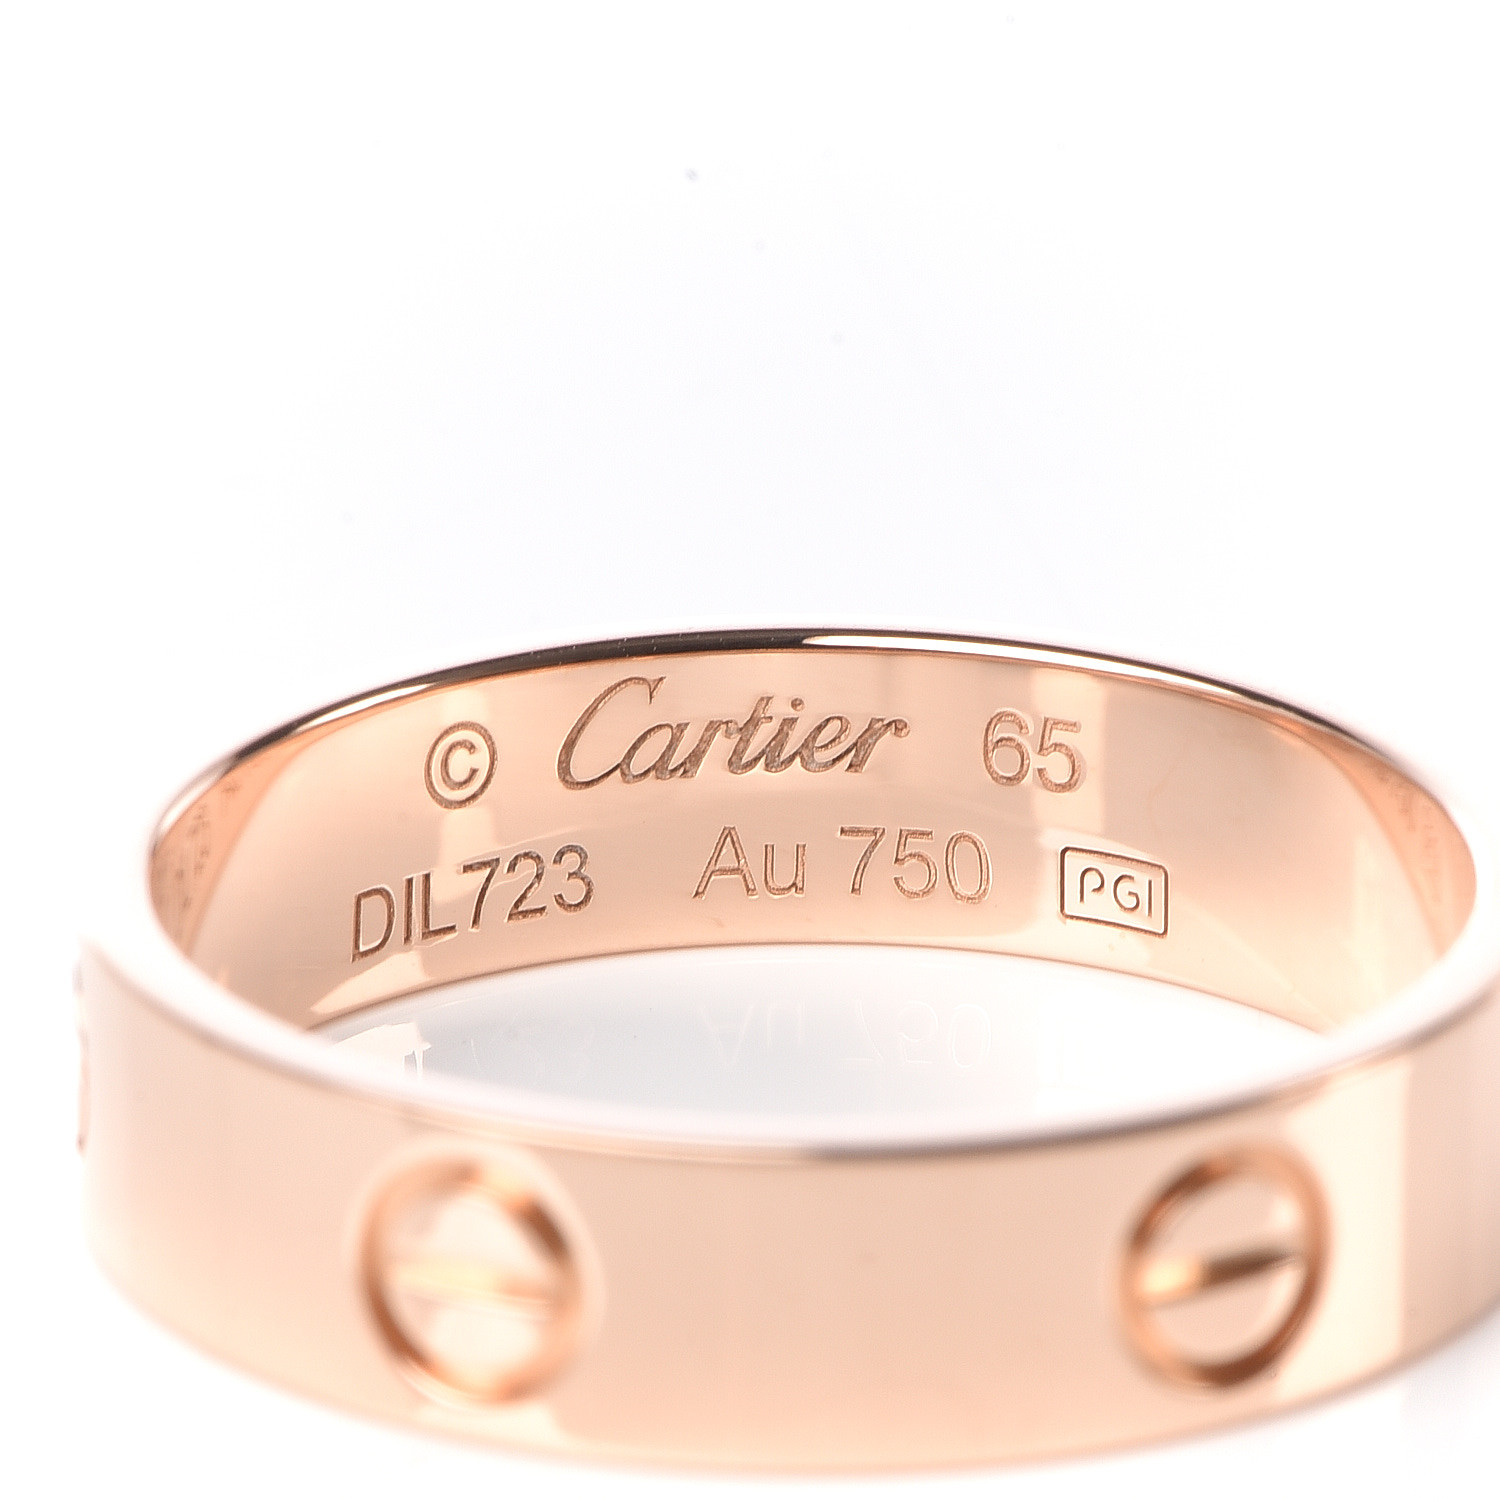 CARTIER 18K Pink Gold 5.5mm LOVE Ring 65 11.25 491444 FASHIONPHILE